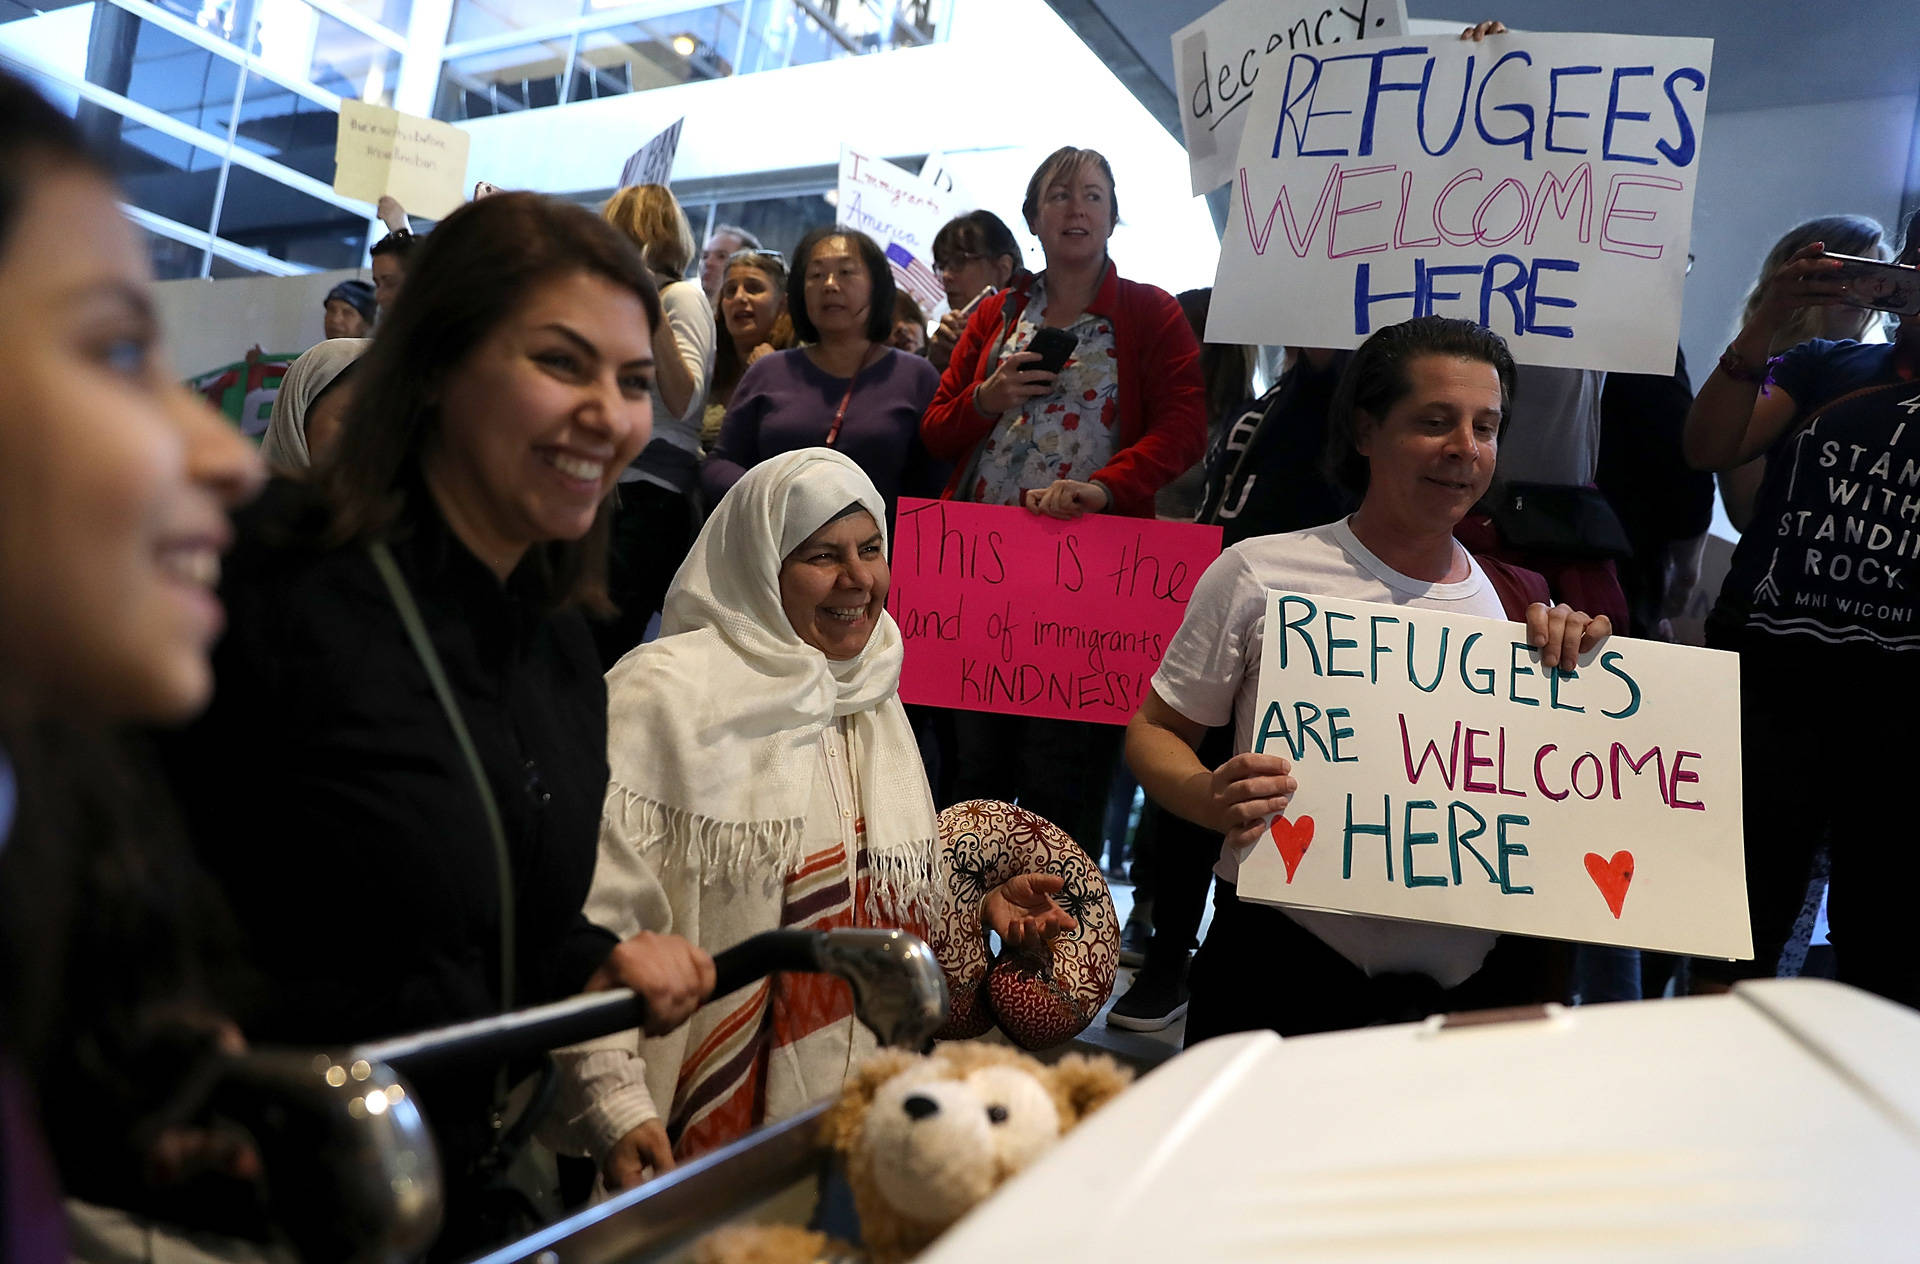 International travelers are welcomed on Jan. 29, 2017, by protesters at LAX holding signs during a demonstration against the immigration ban that was imposed by President Donald Trump. Justin Sullivan/Getty Images